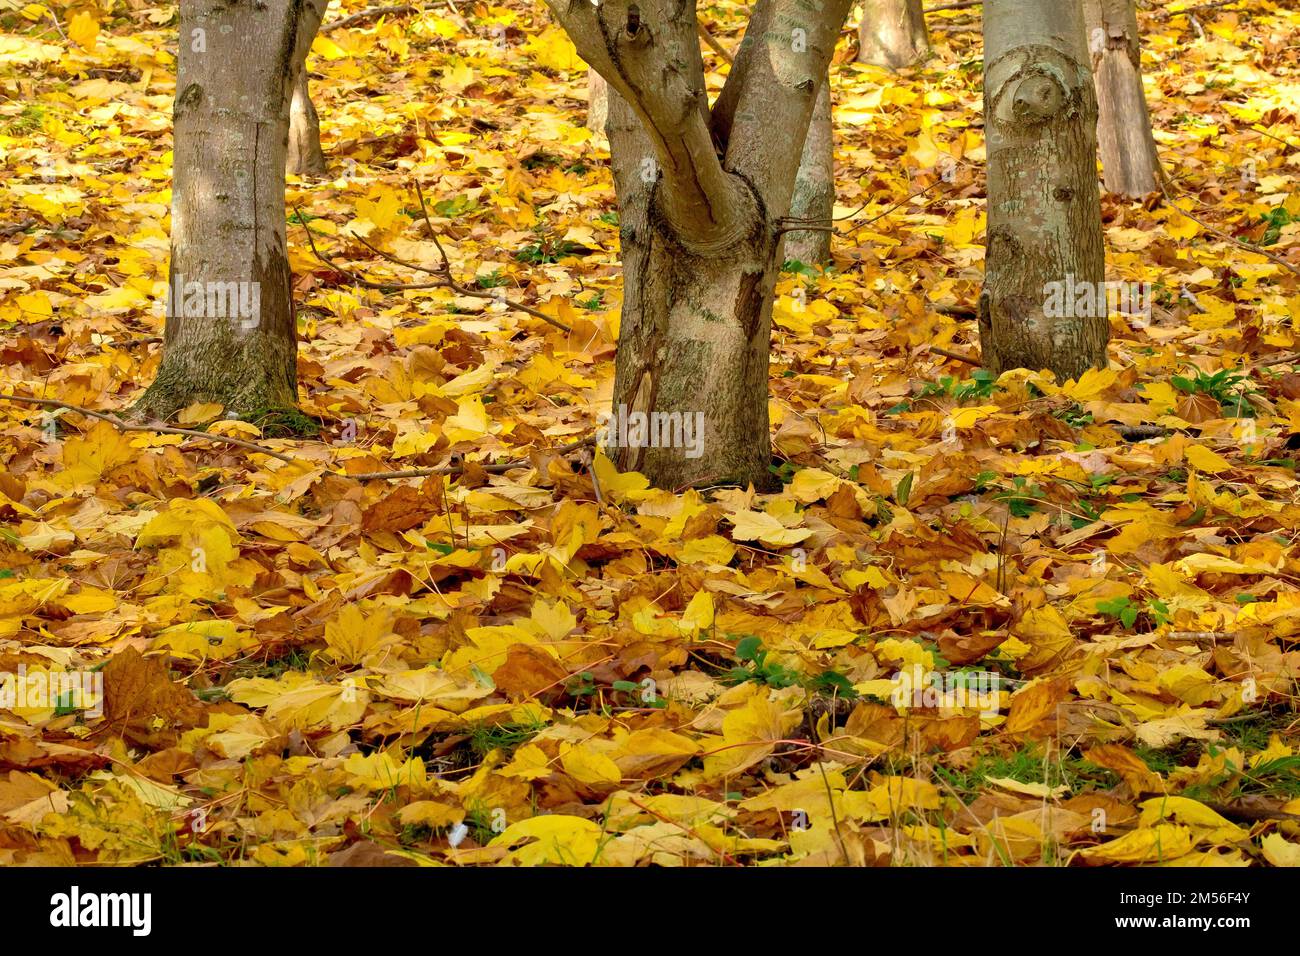 A shot of the floor of a small piece of open woodland in the autumn, the ground strewn with the fallen yellow leaves of the trees. Stock Photo